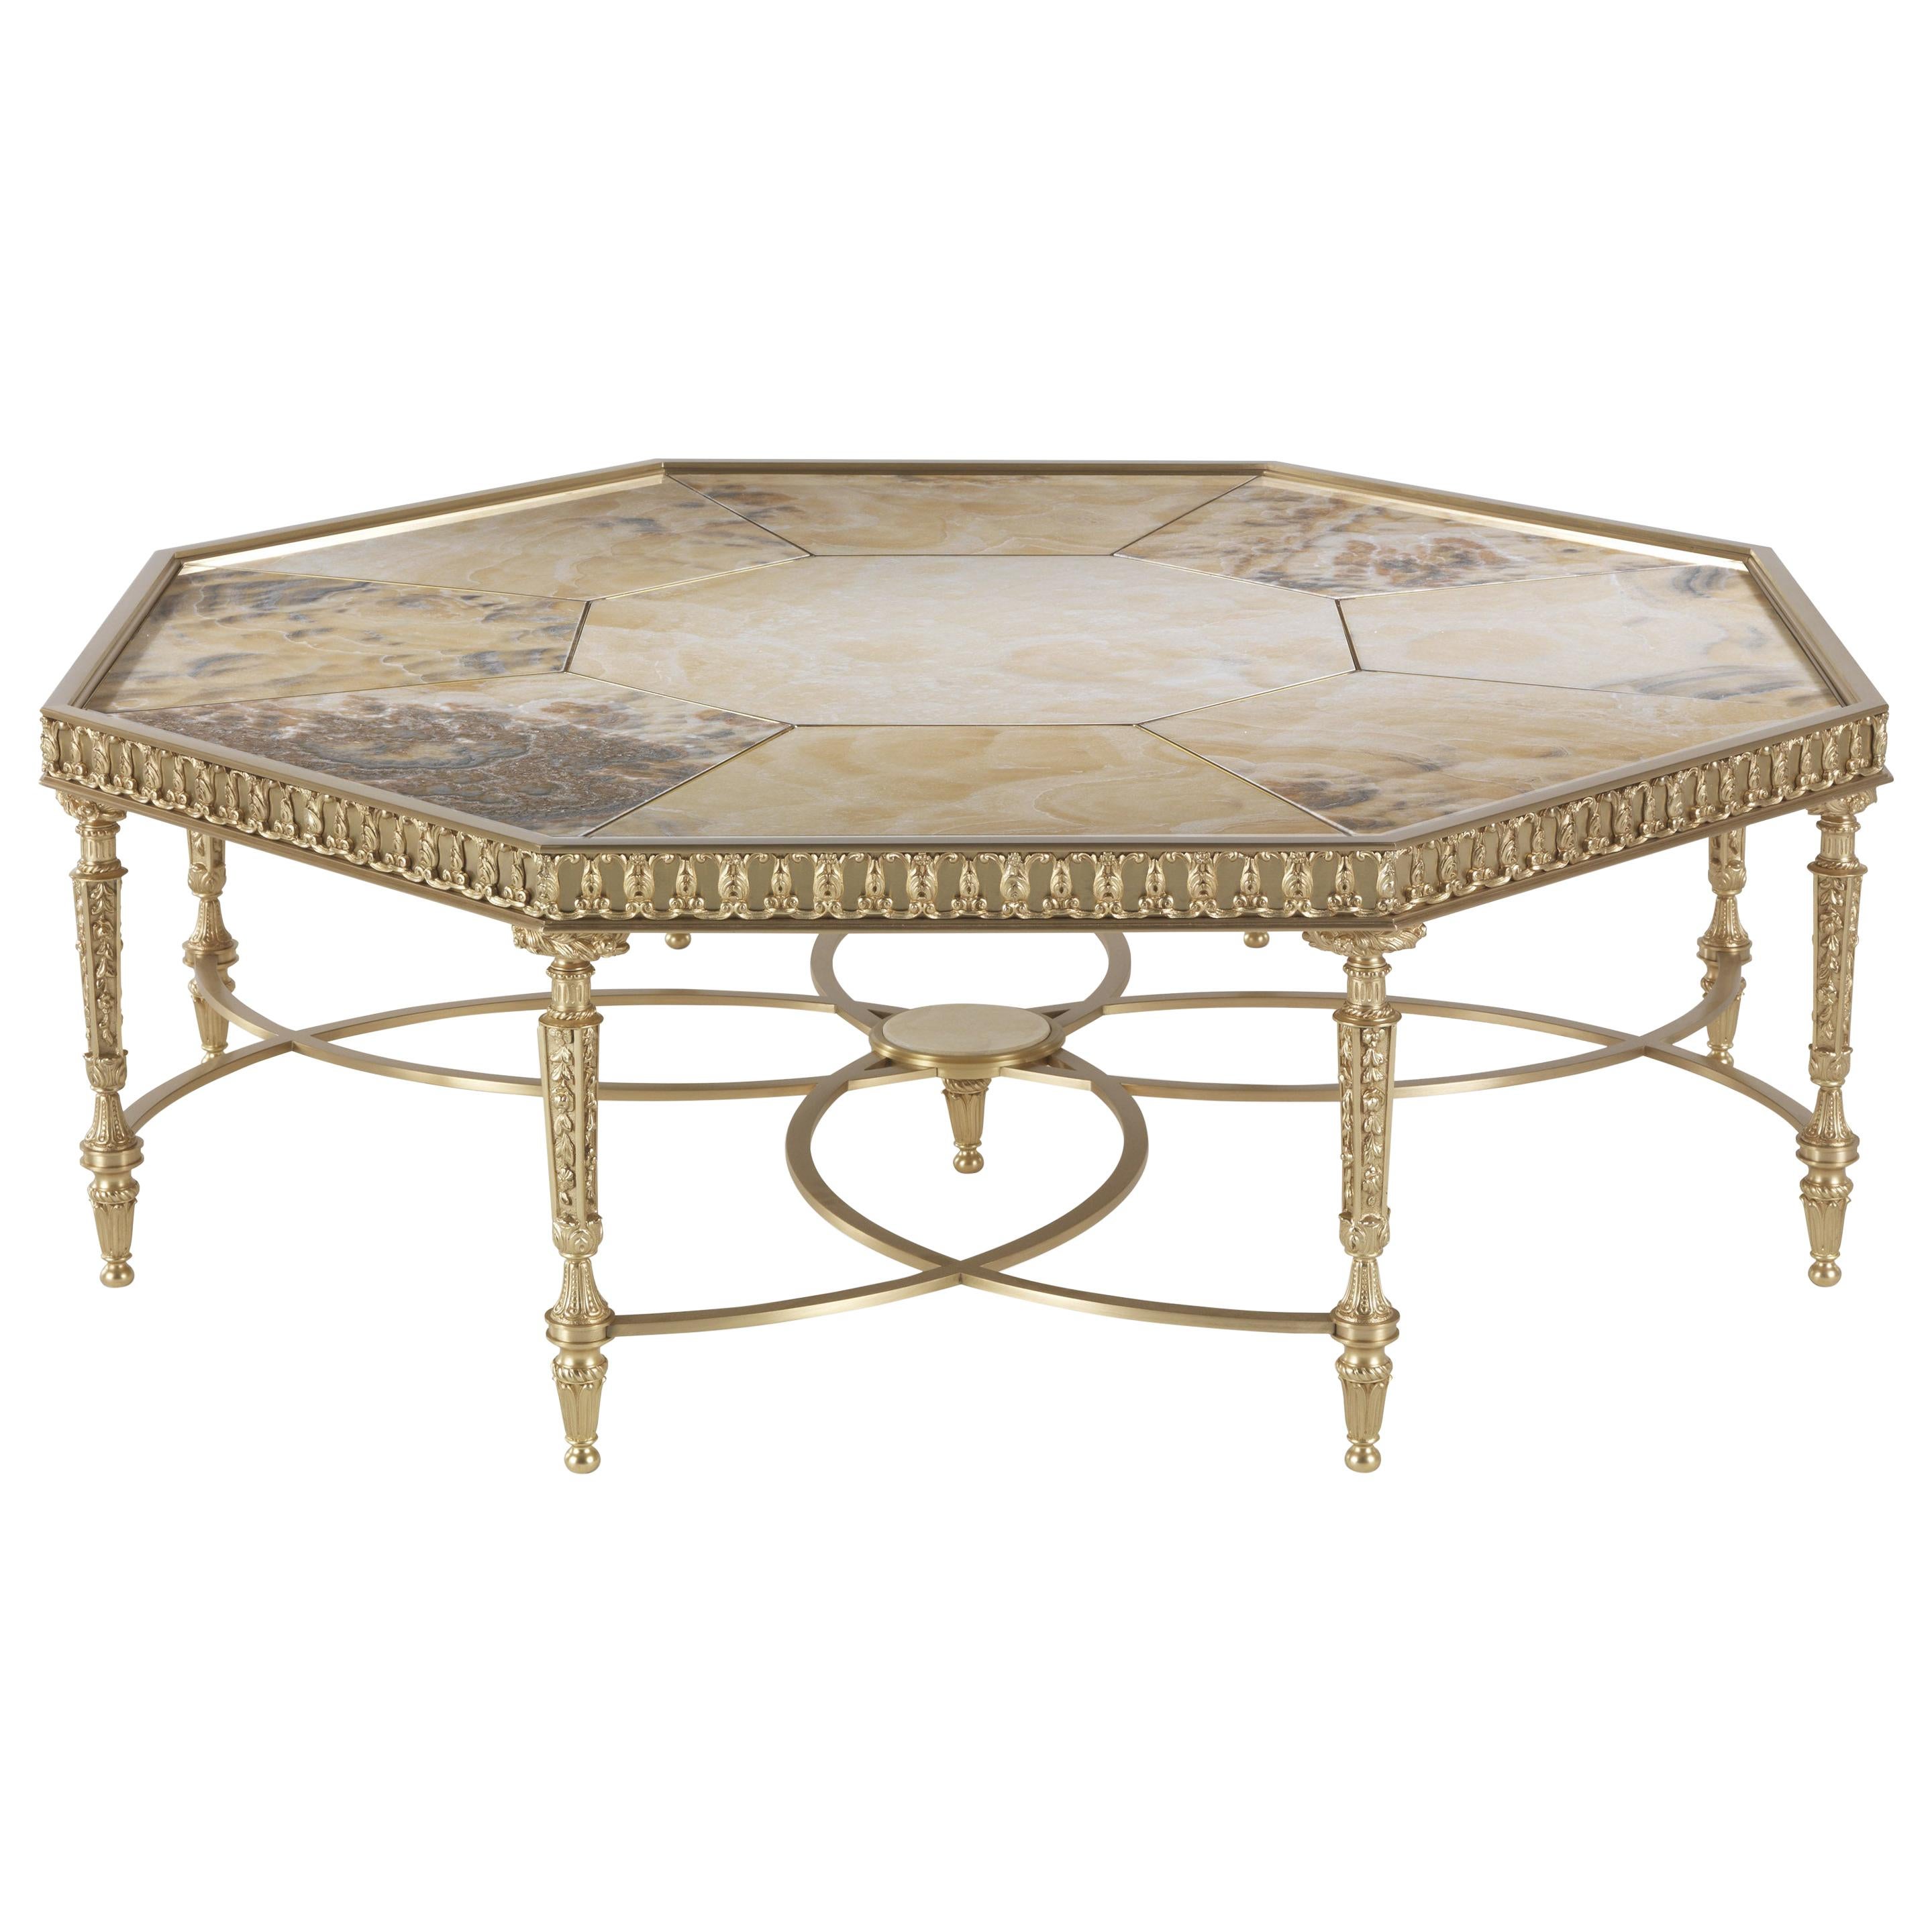 21st Century Lumiere Central Table in Lost-wax Cast Brass and Cloudy Onyx Top